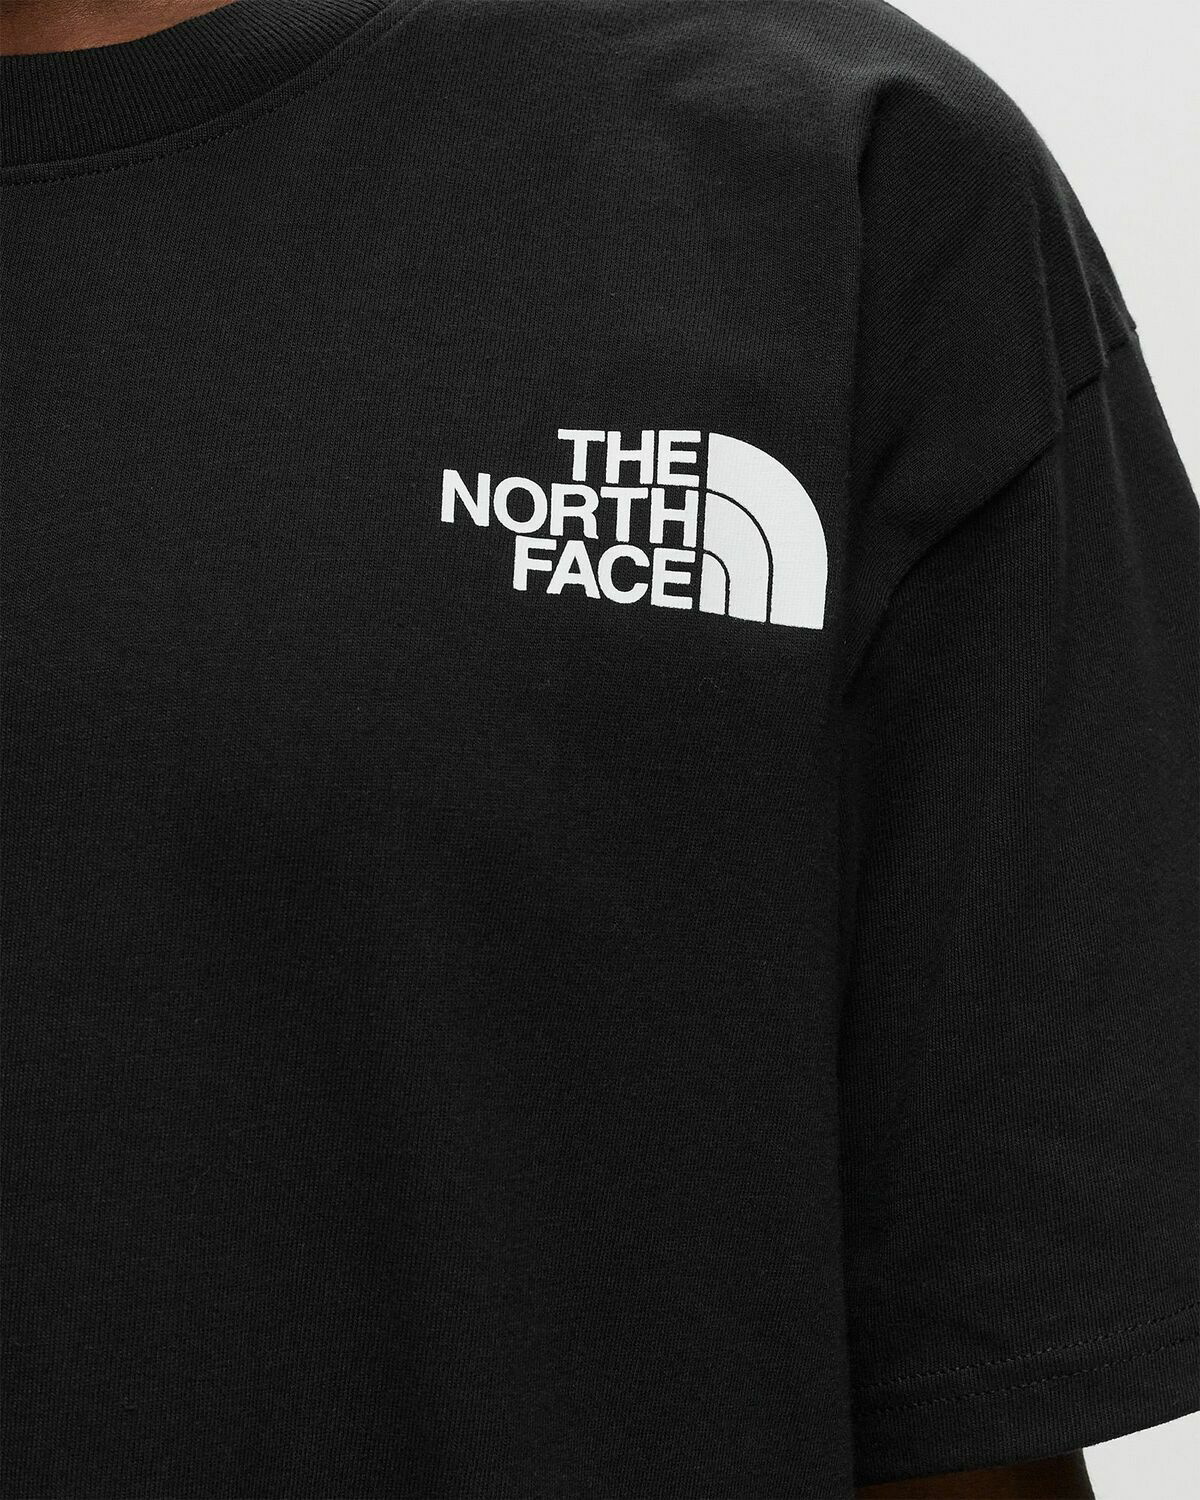 The North Face S/S Heavyweight Relaxed Tee Black - Mens - Shortsleeves The  North Face